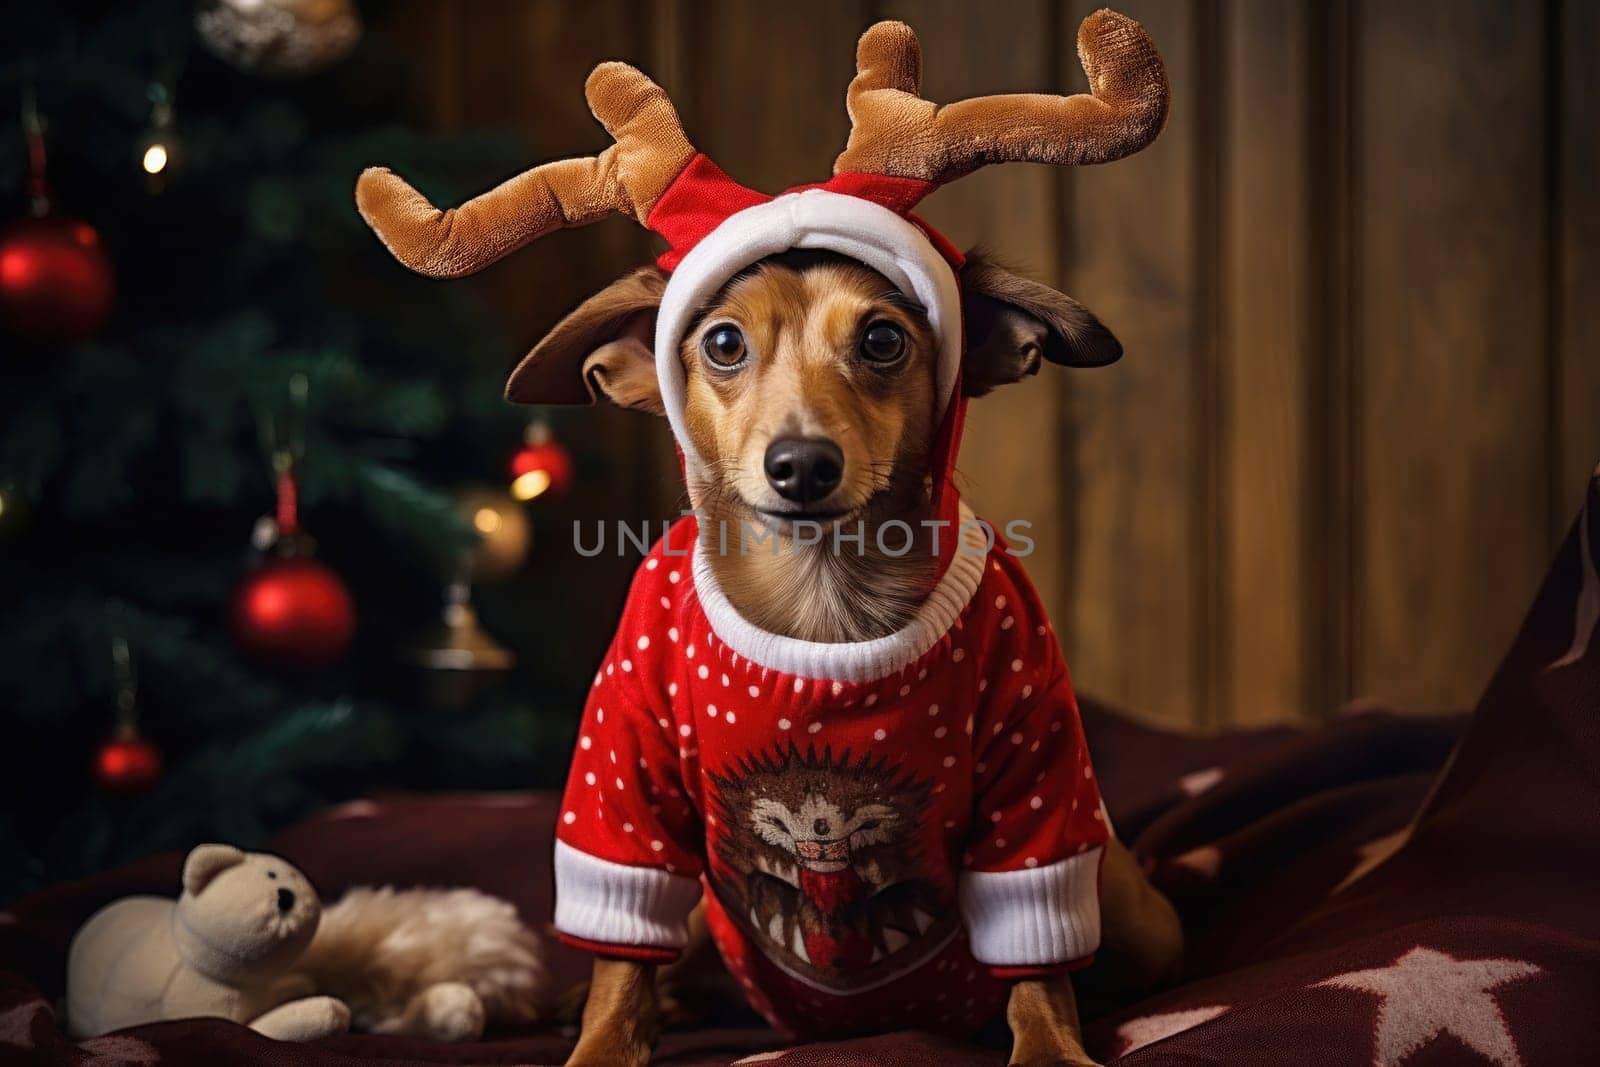 Funny dog in Christmas costume against a merry holiday background with Christmas tree.